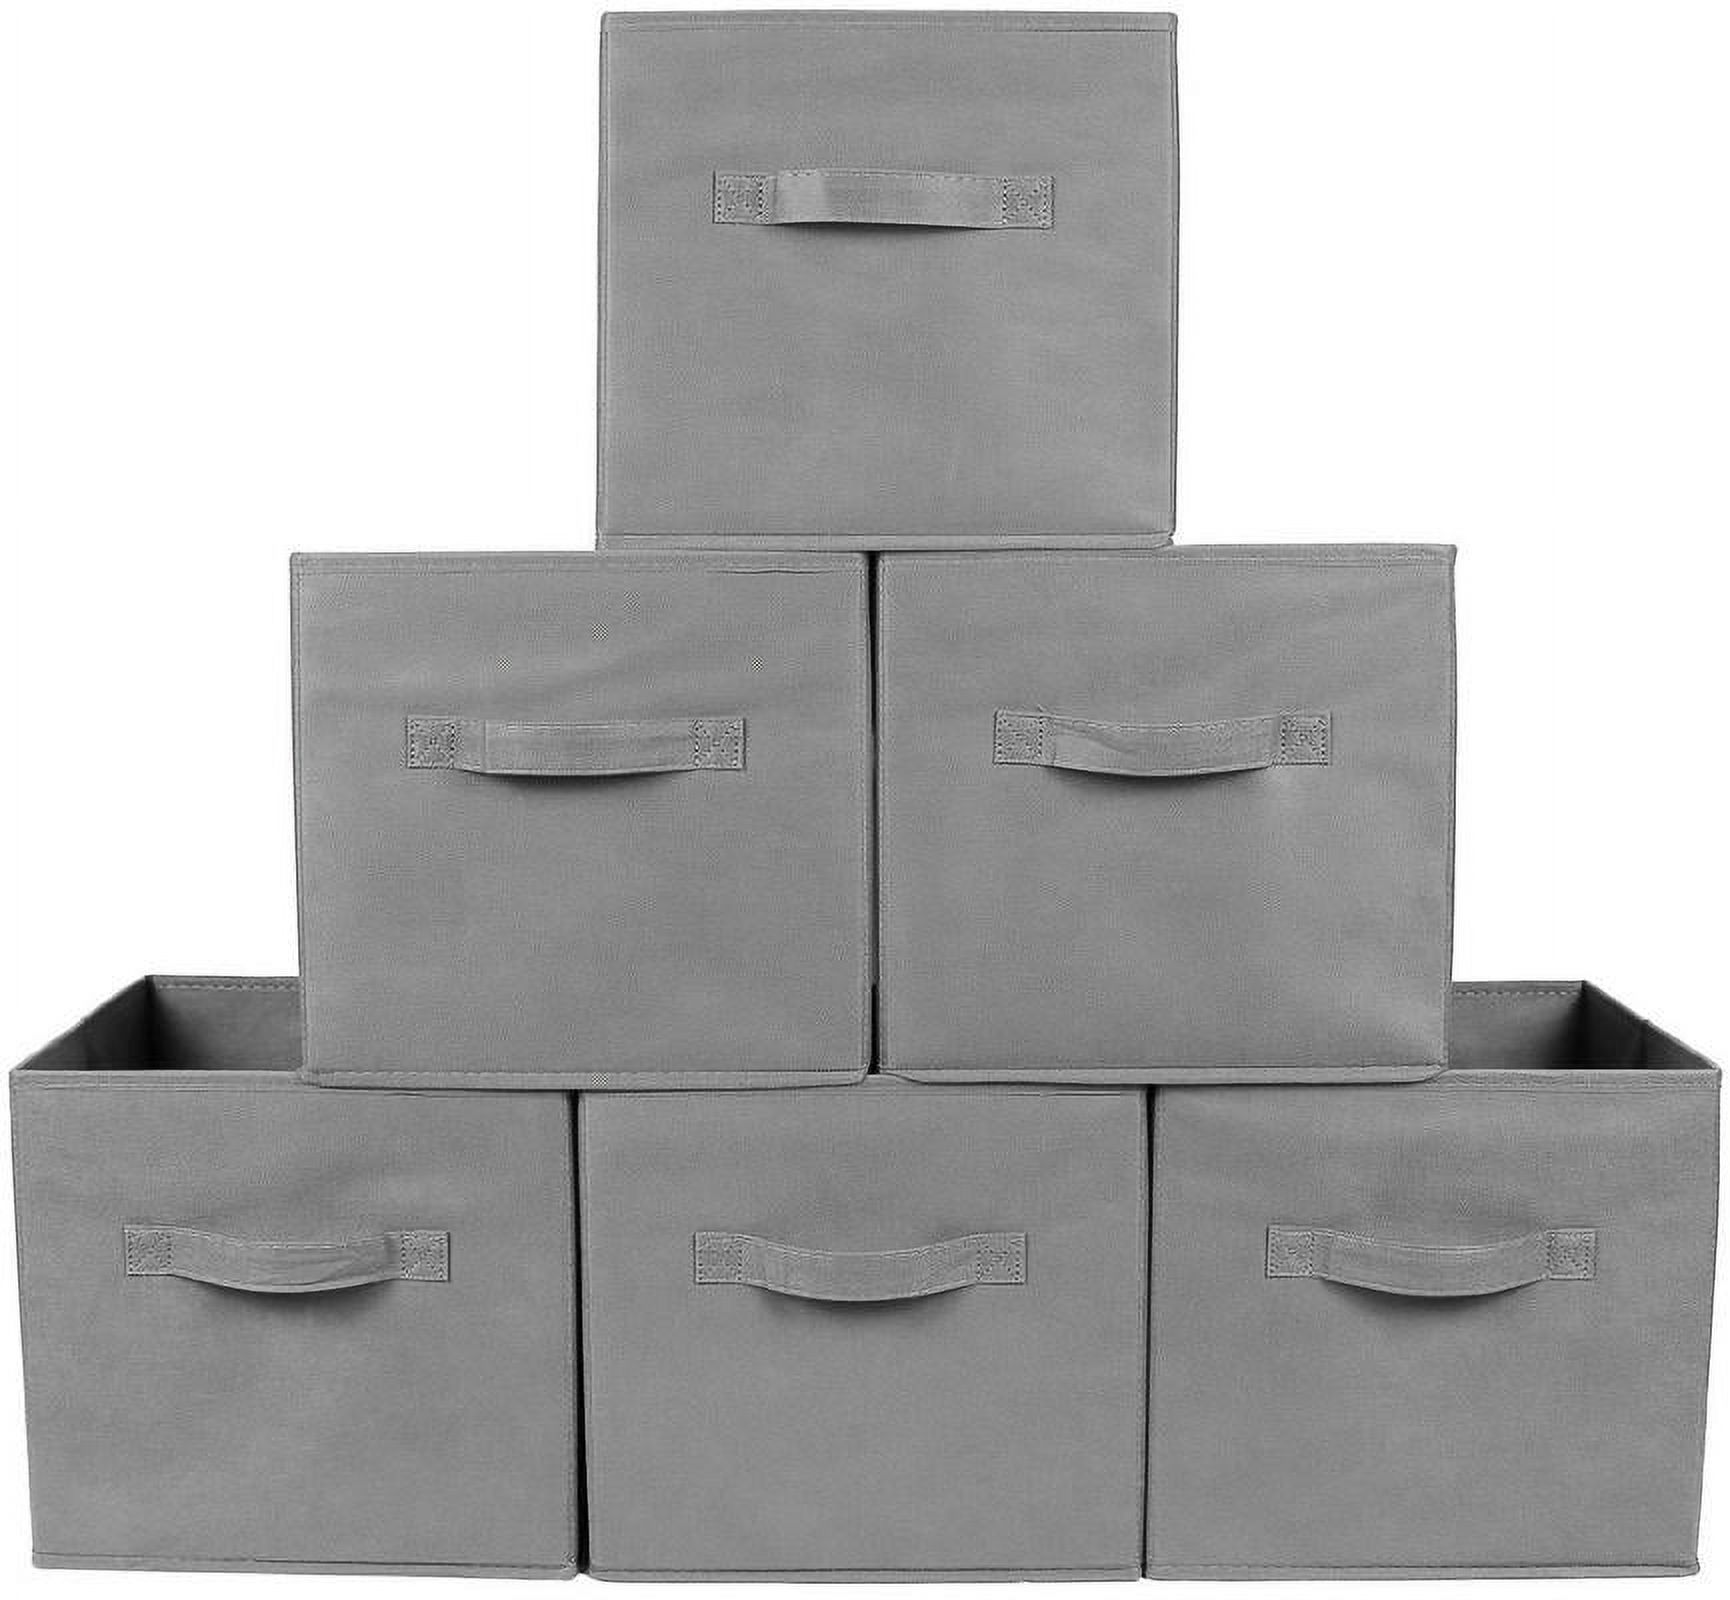 Greenco Foldable Fabric Storage Cubes Non-Woven Fabric | Gray Cube Storage Bins | Shelf Baskets| Gray Fabric Cubes | 6 Pack - image 1 of 5